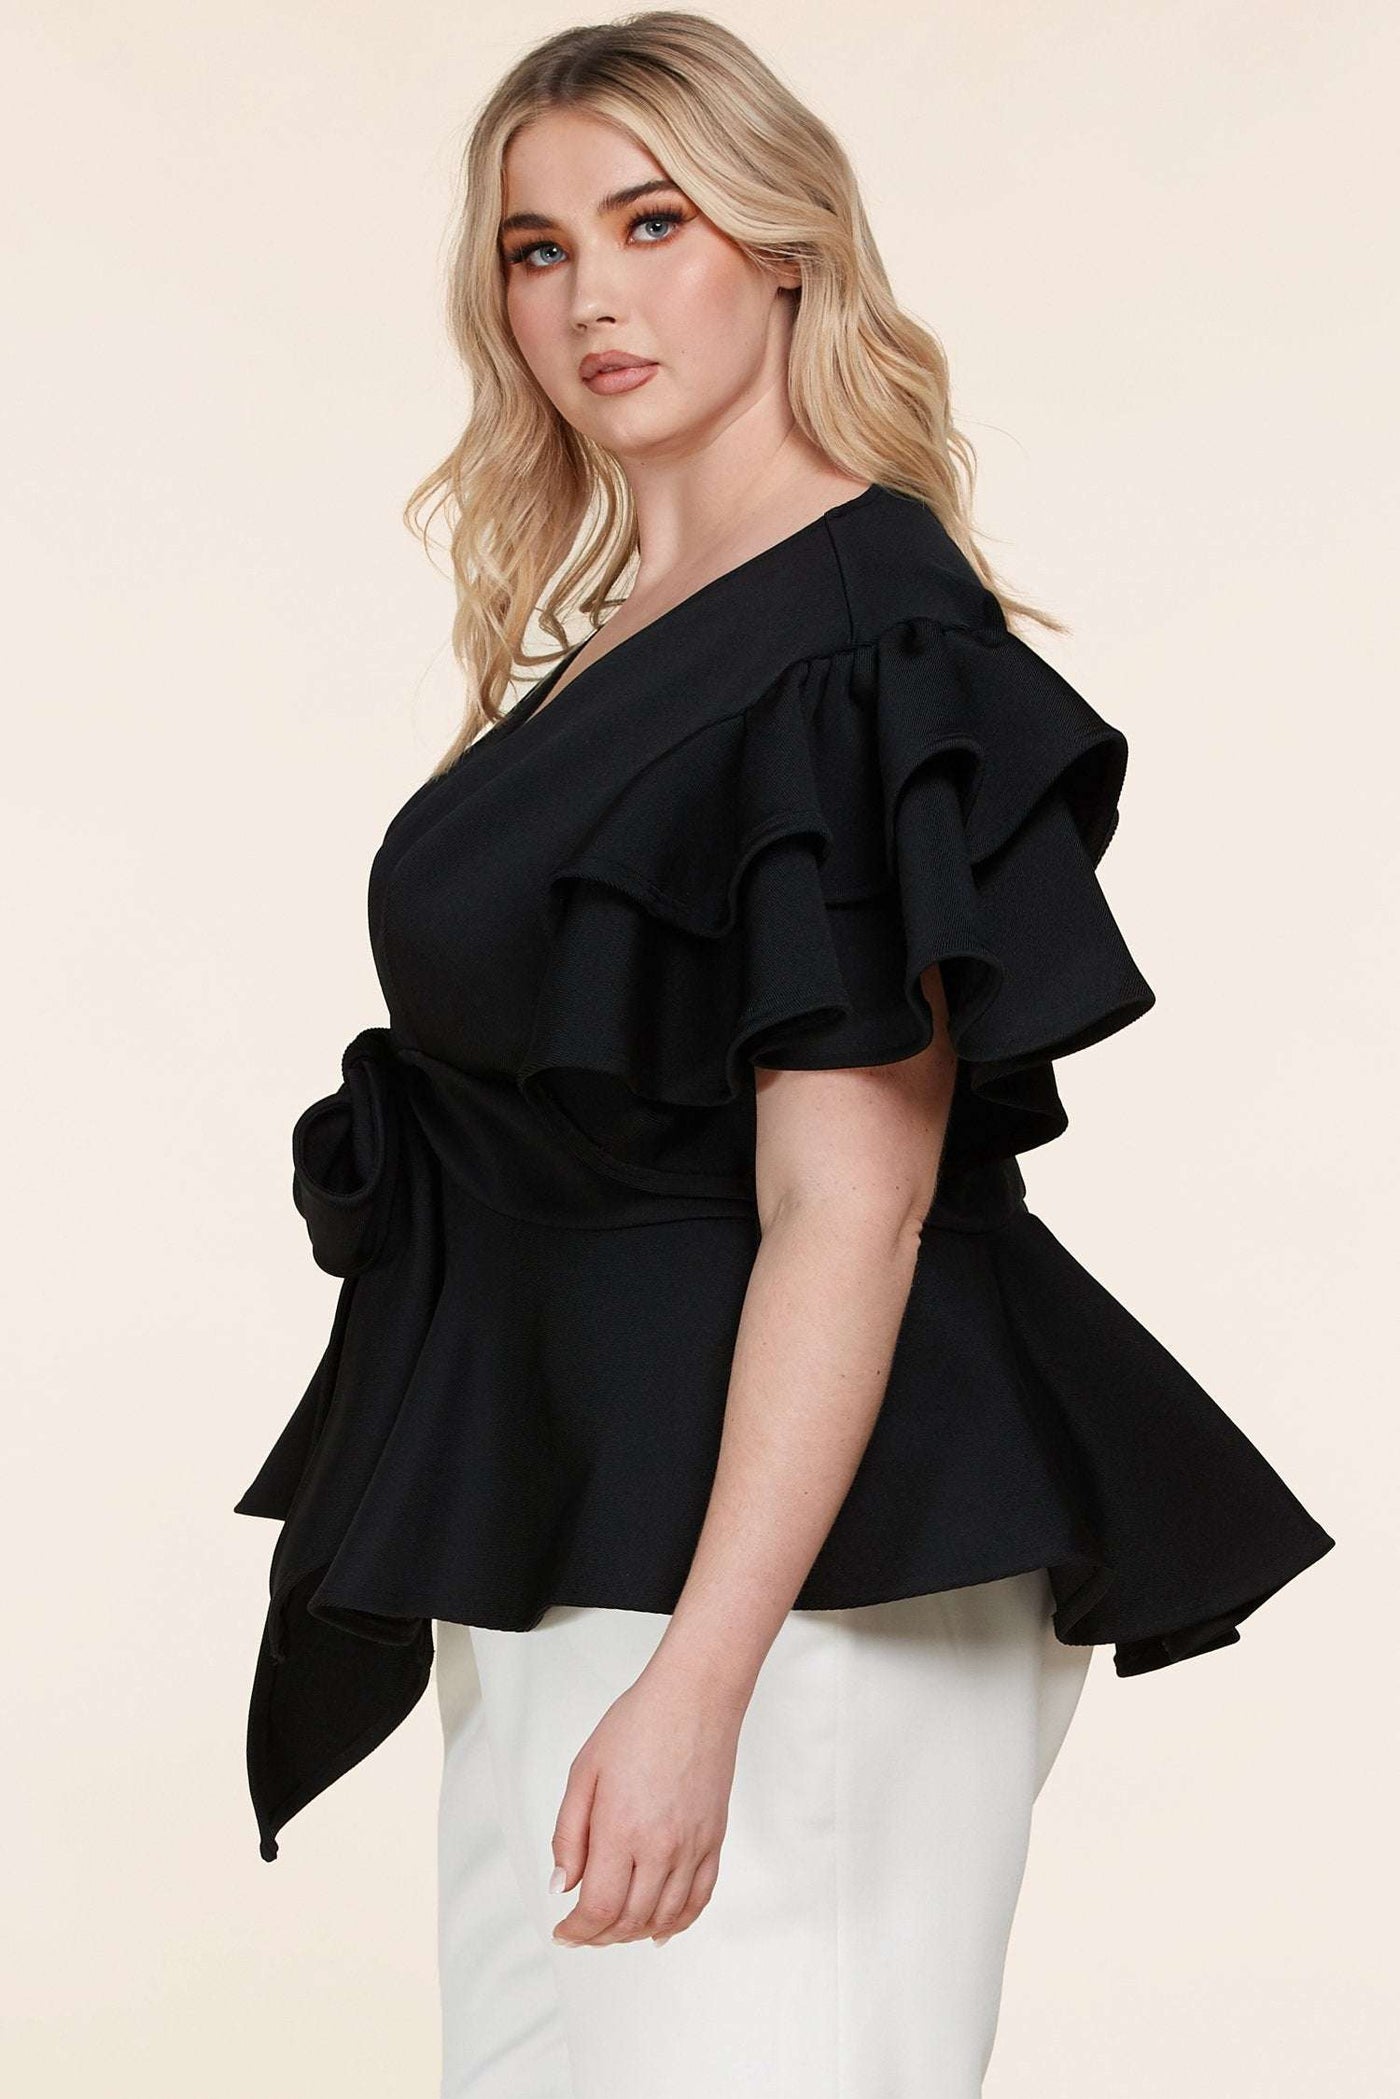 Fasheabe Plus Size Black Ruffle Plunging V-Neck Fit and Flare Top